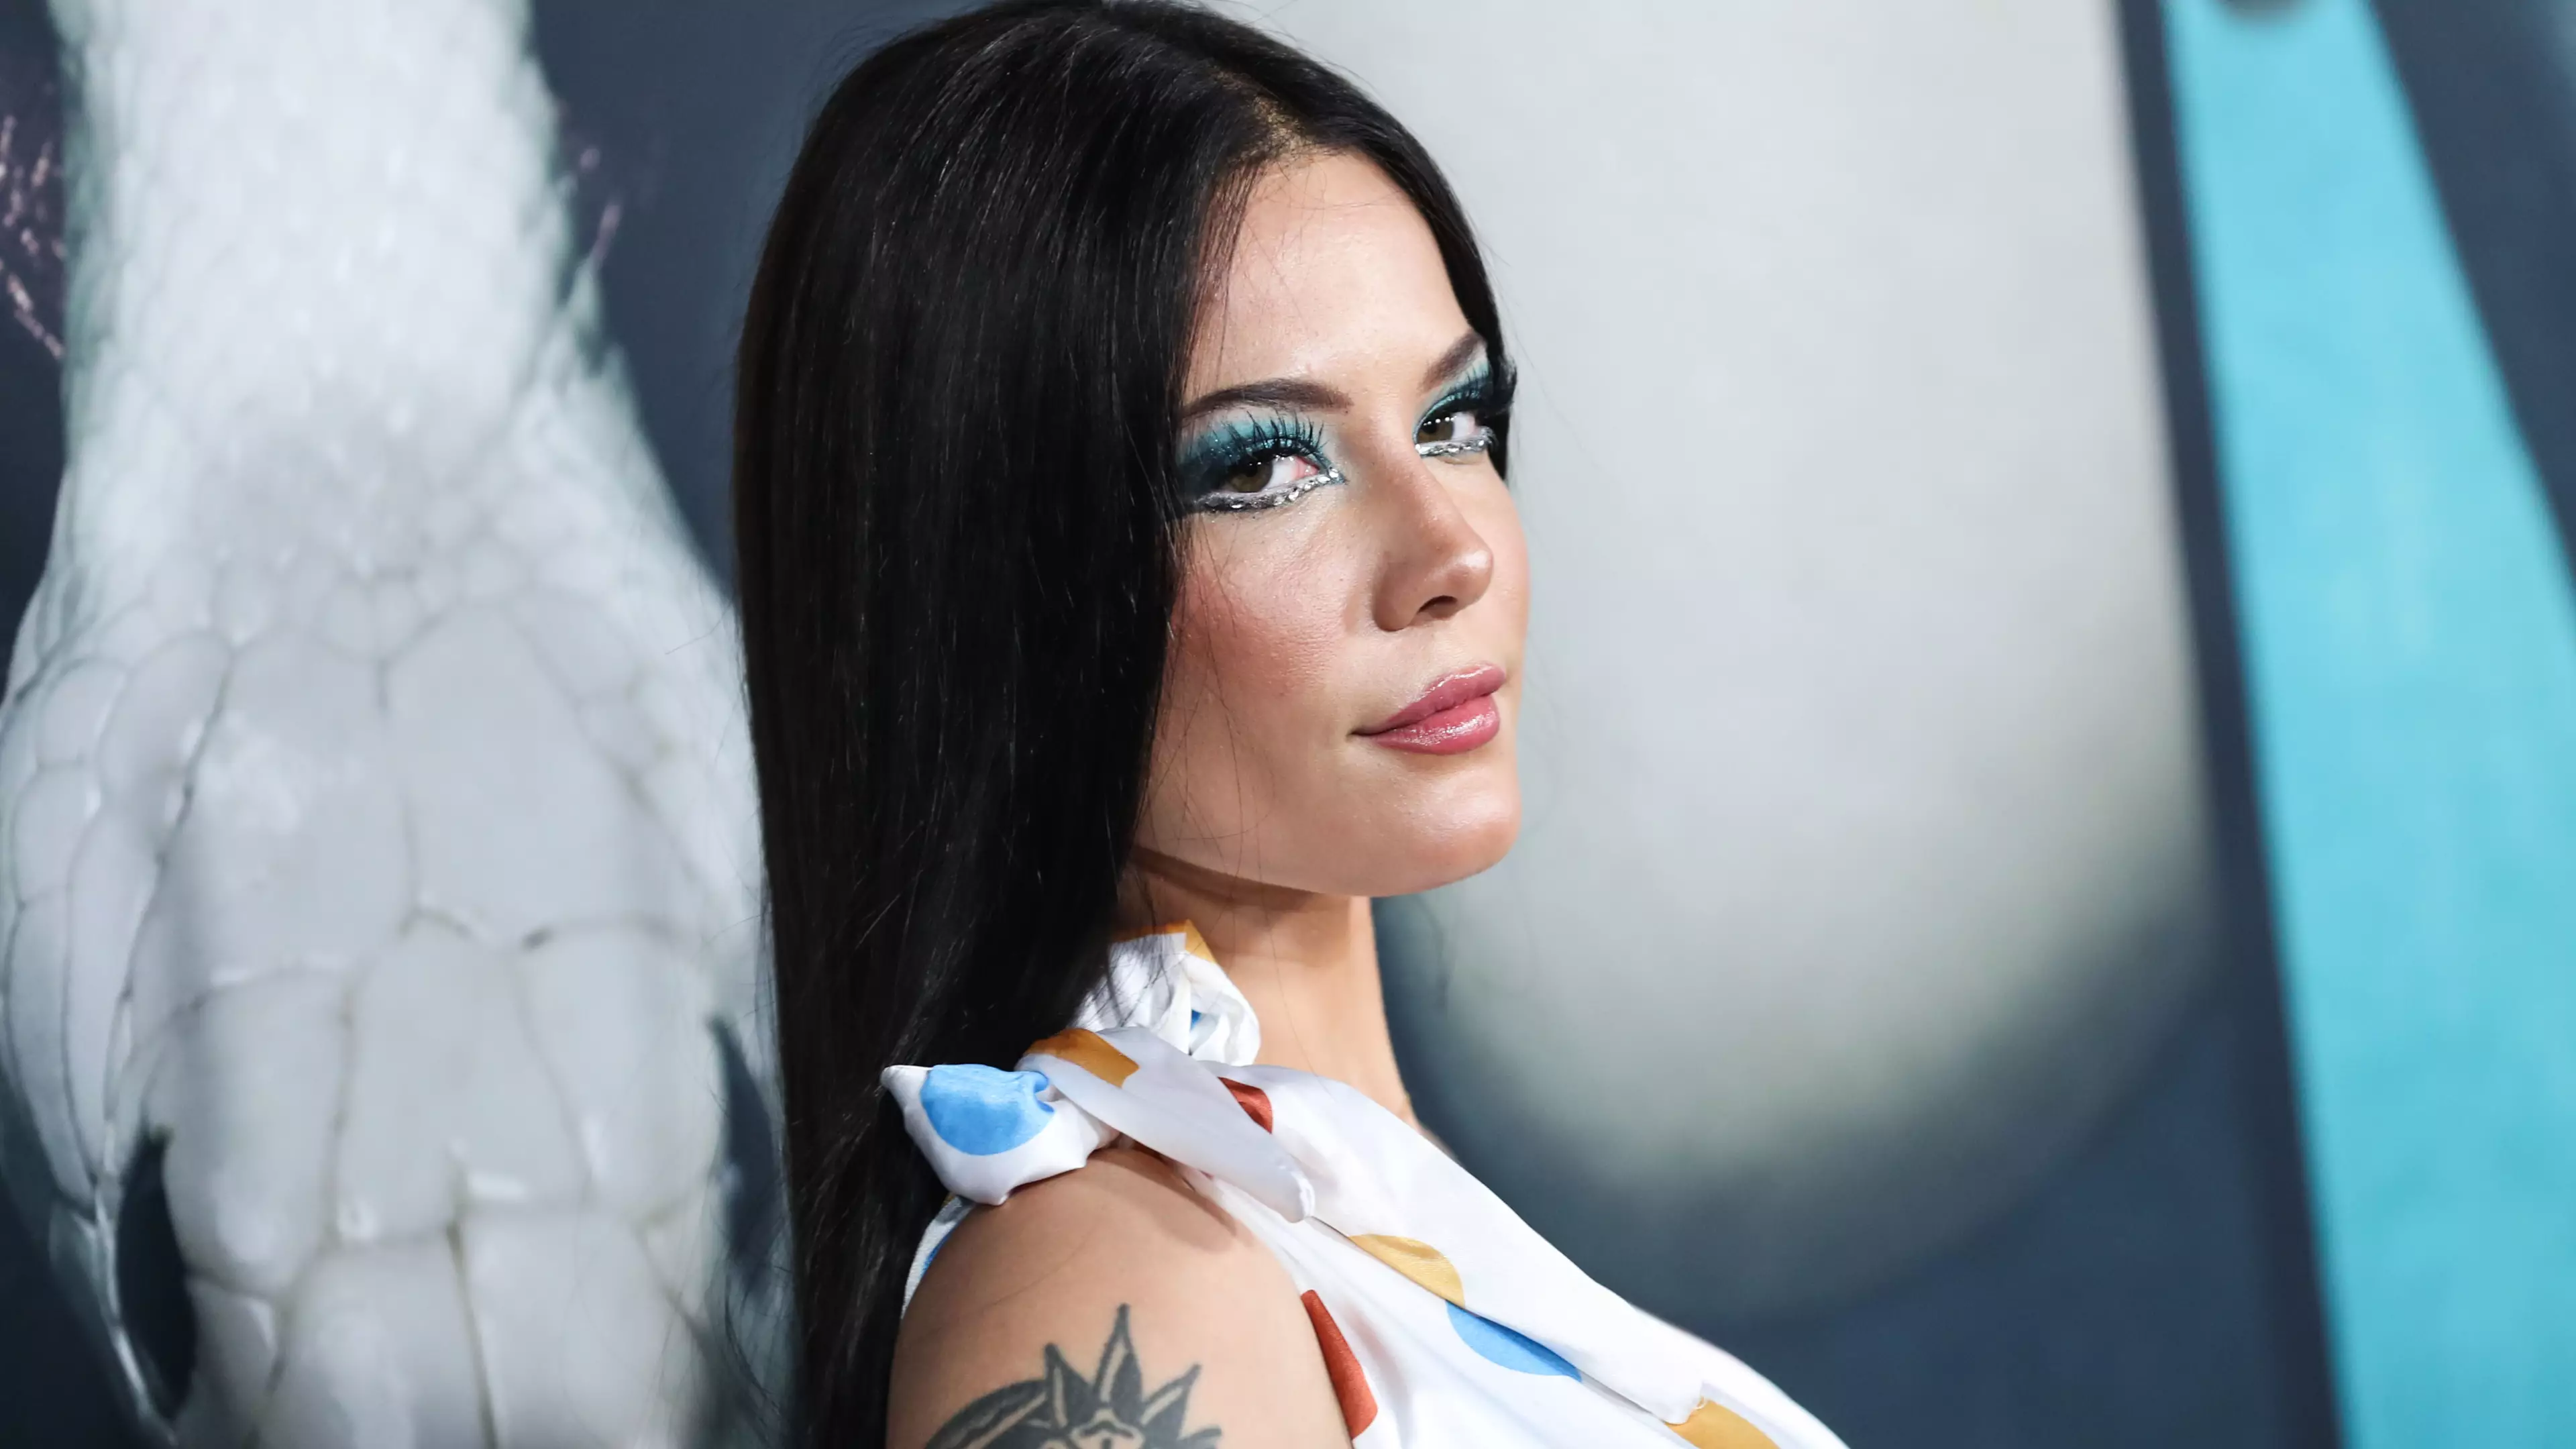 Halsey Announces She Is Taking An Extended Break From Touring